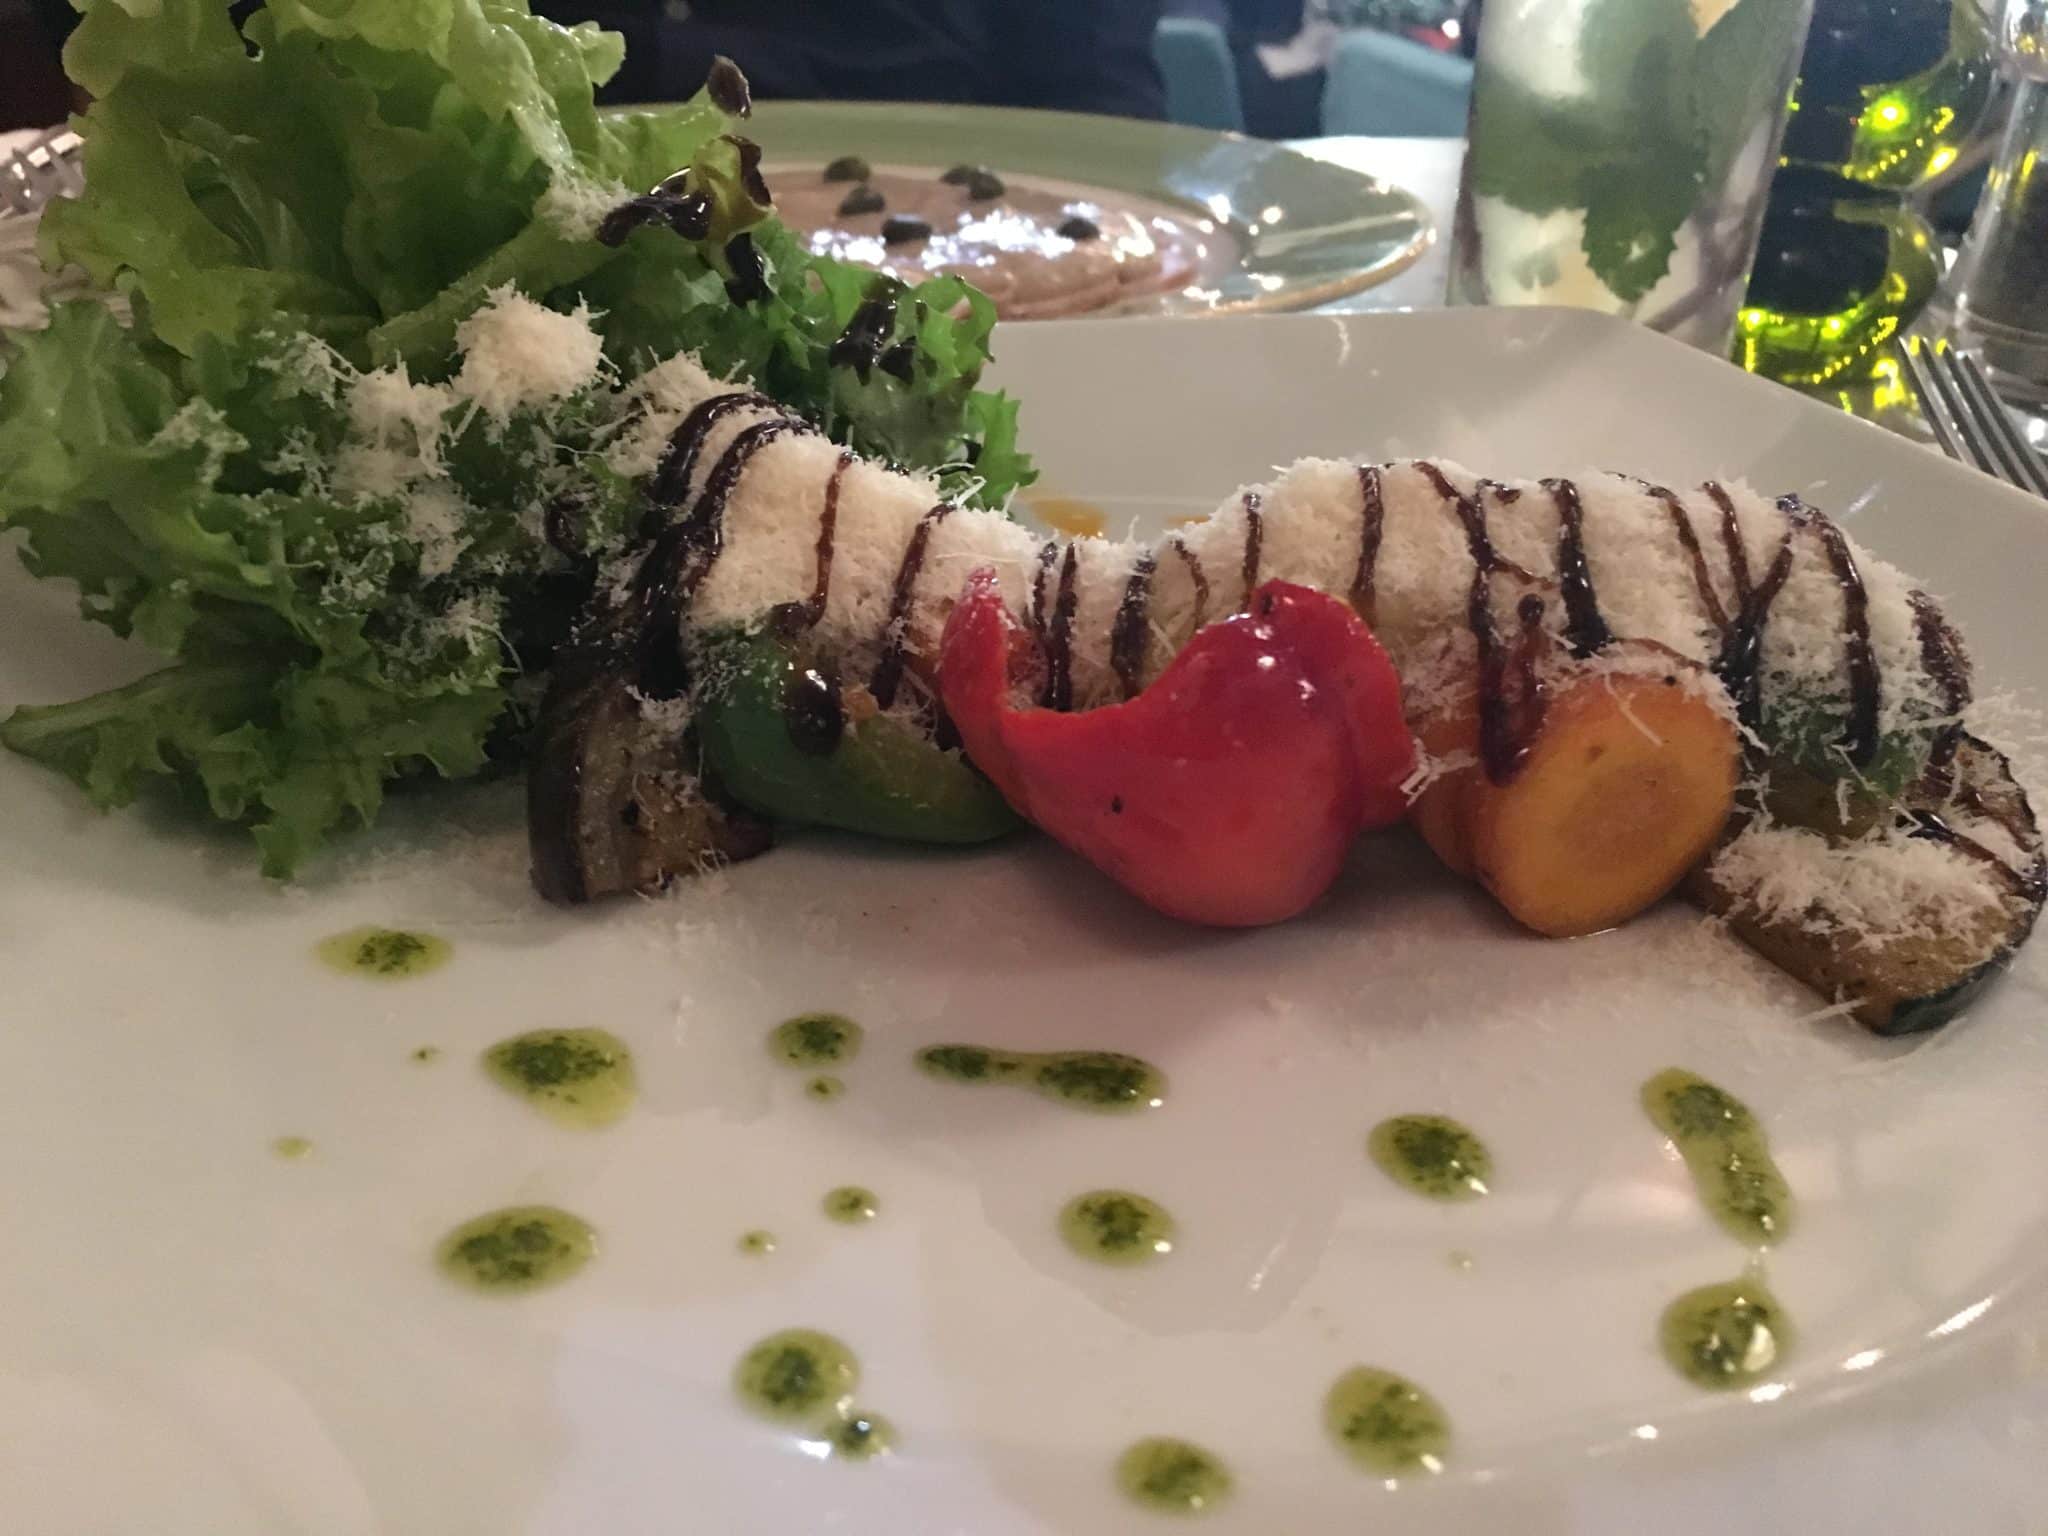 Eclectico at Paseo 206: Cuban & Italian Fusion Restaurant Review grilled vegetables